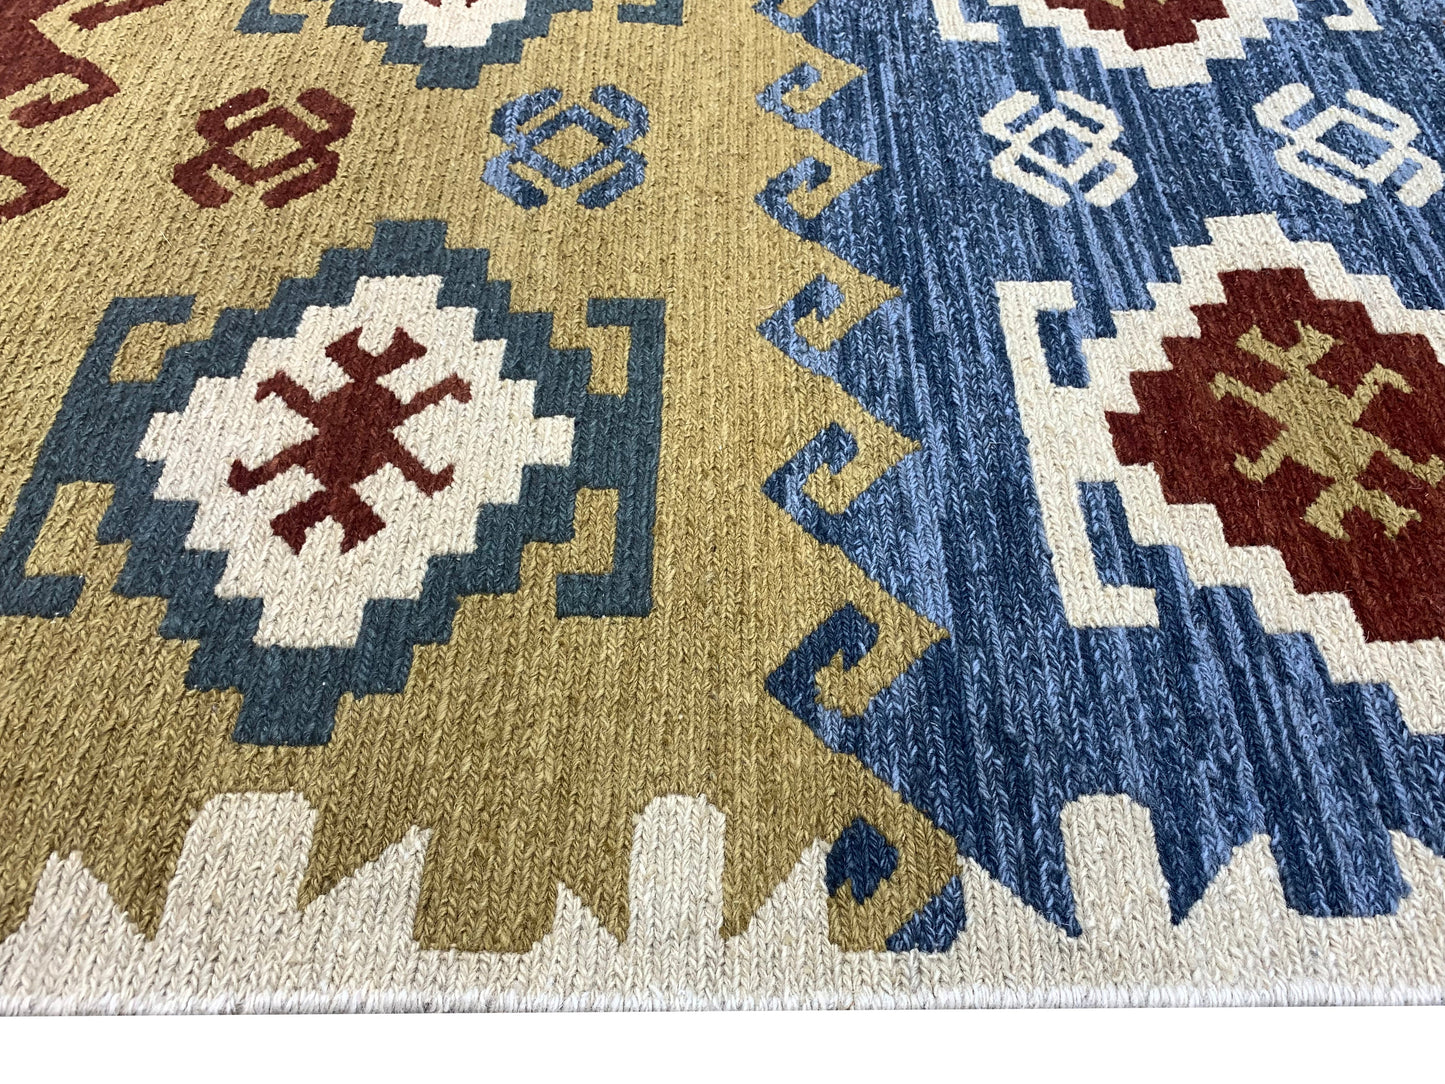 Get trendy with Ivory Pure Wool Traditional Soumak Area Rug 6.1x8.11ft 185x272Cms - Traditional Rugs available at Jaipur Oriental Rugs. Grab yours for $545.00 today!